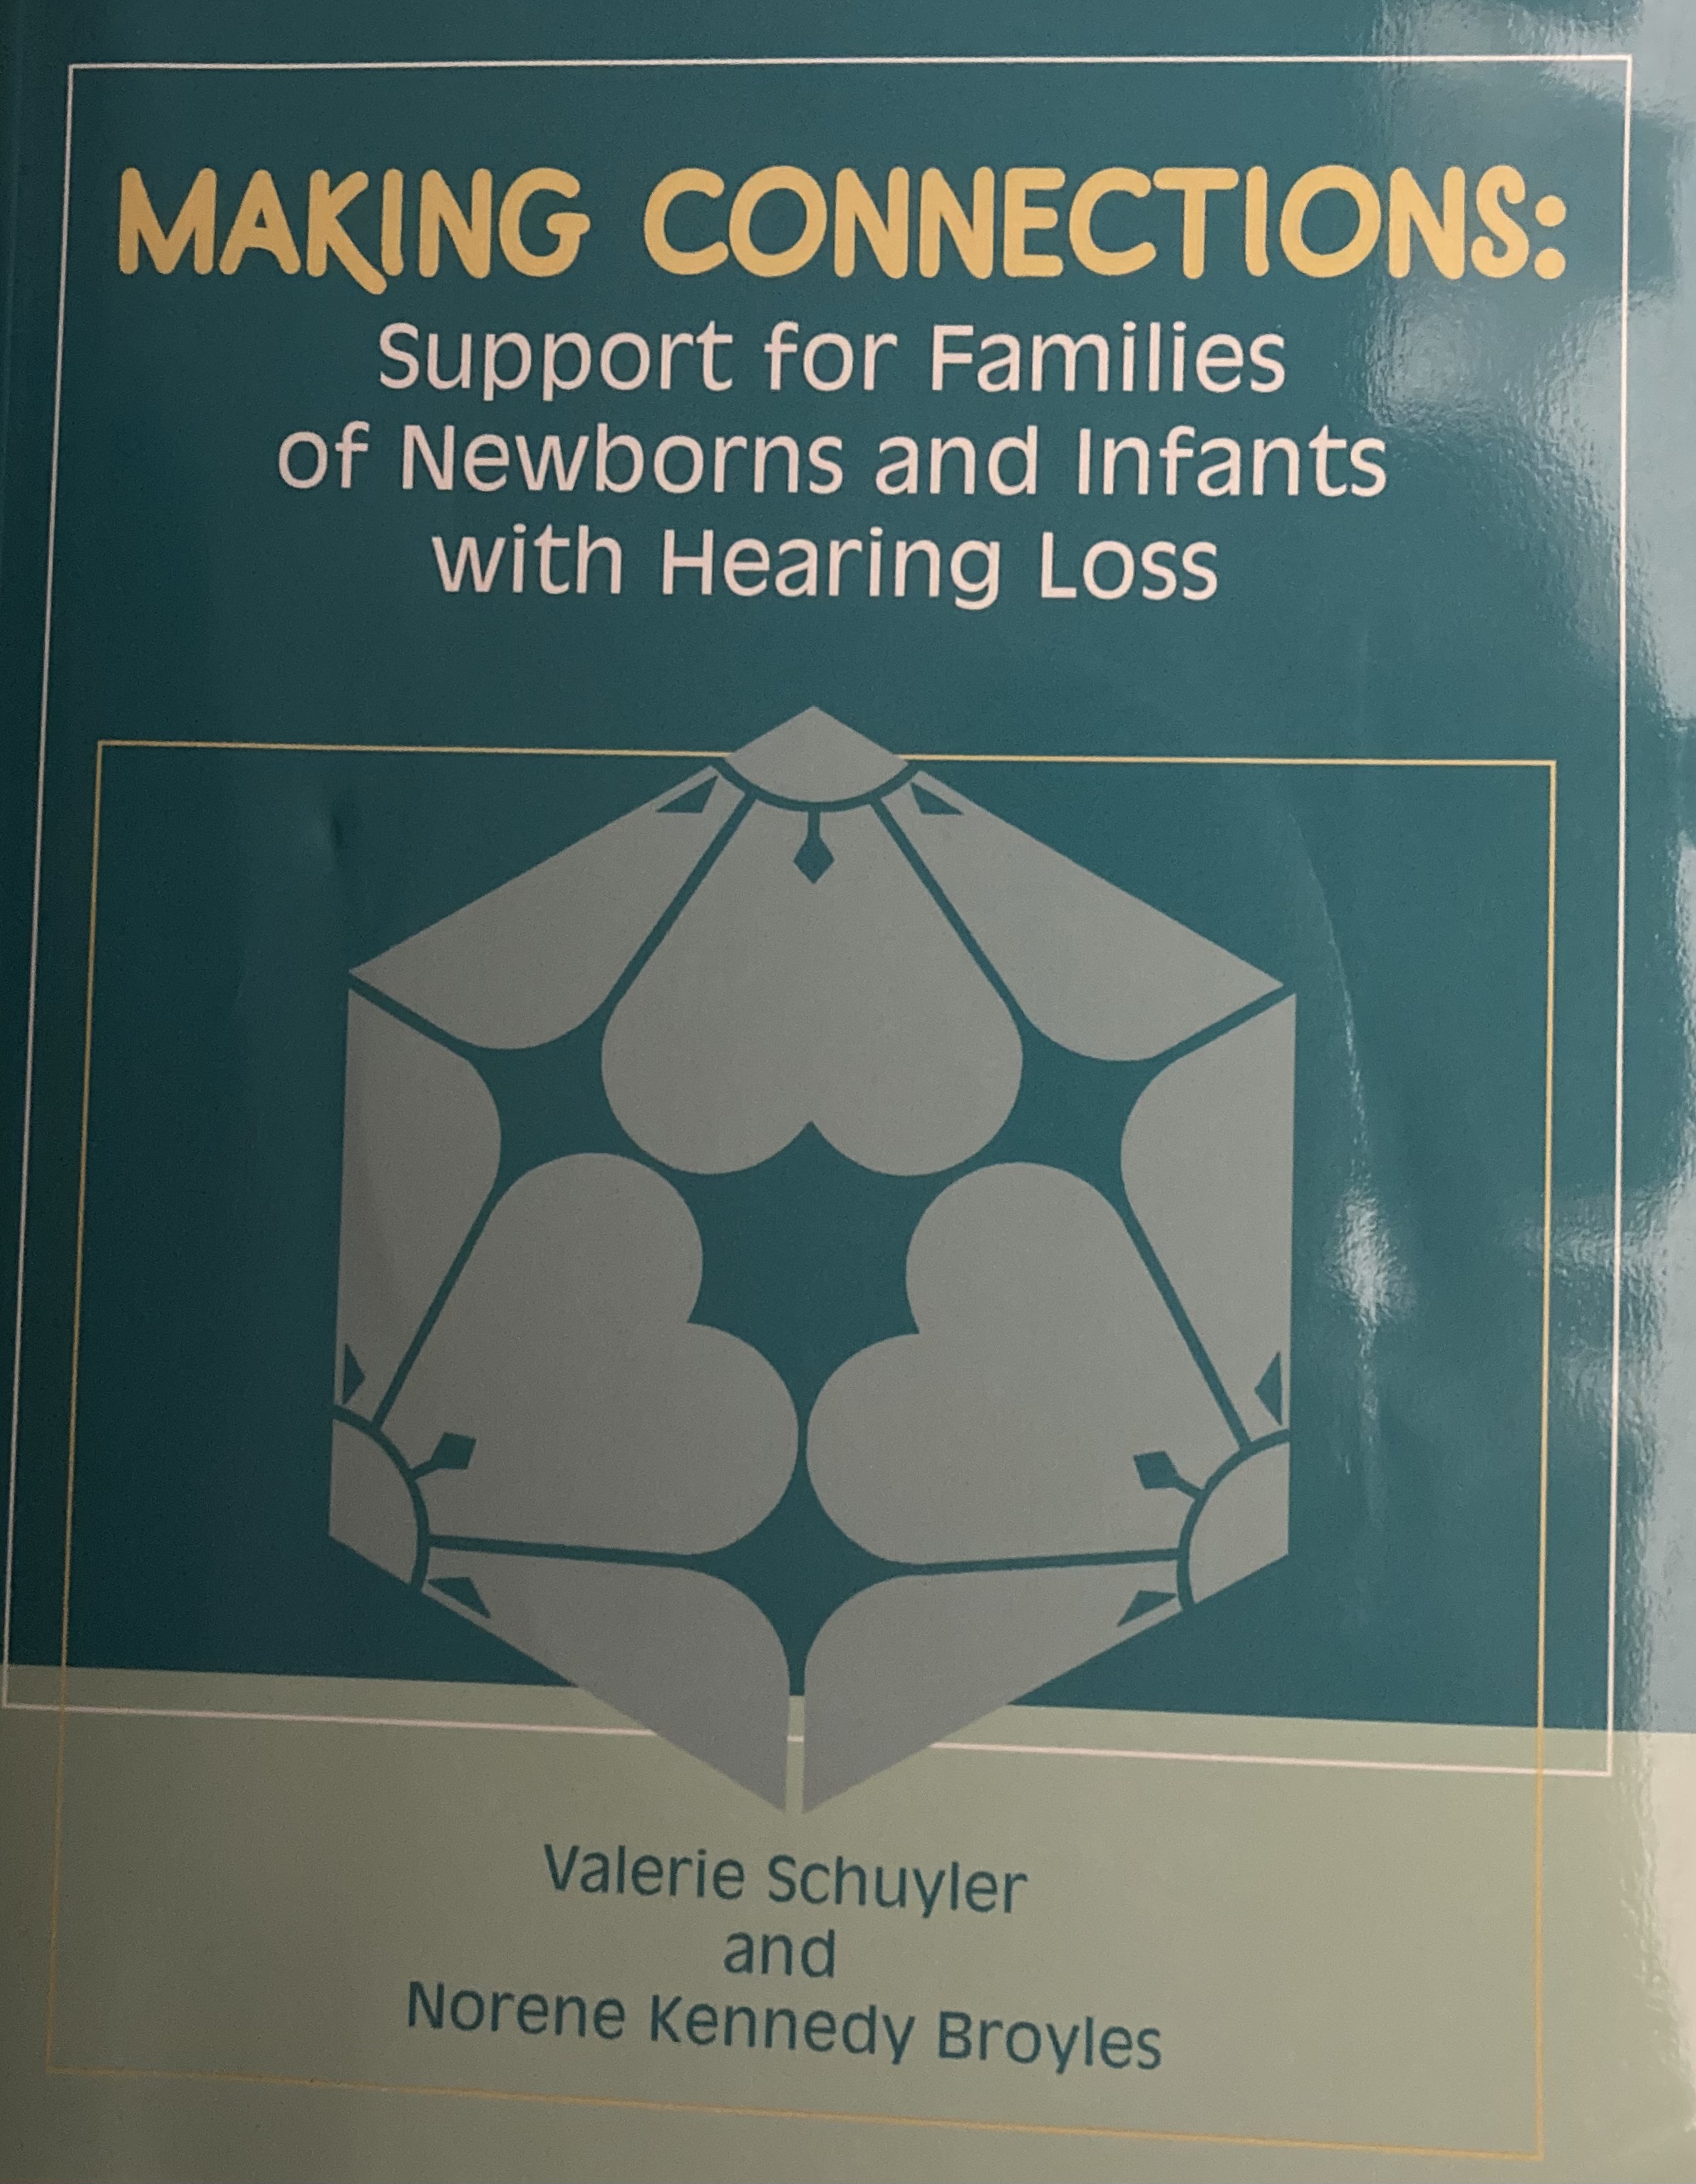 The title "Making Connections: Support for Families of Newborns and Infants with Hearing Loss" is at the top with a green background. The bookcover also features a symmetrical image of hearts and flowers. 